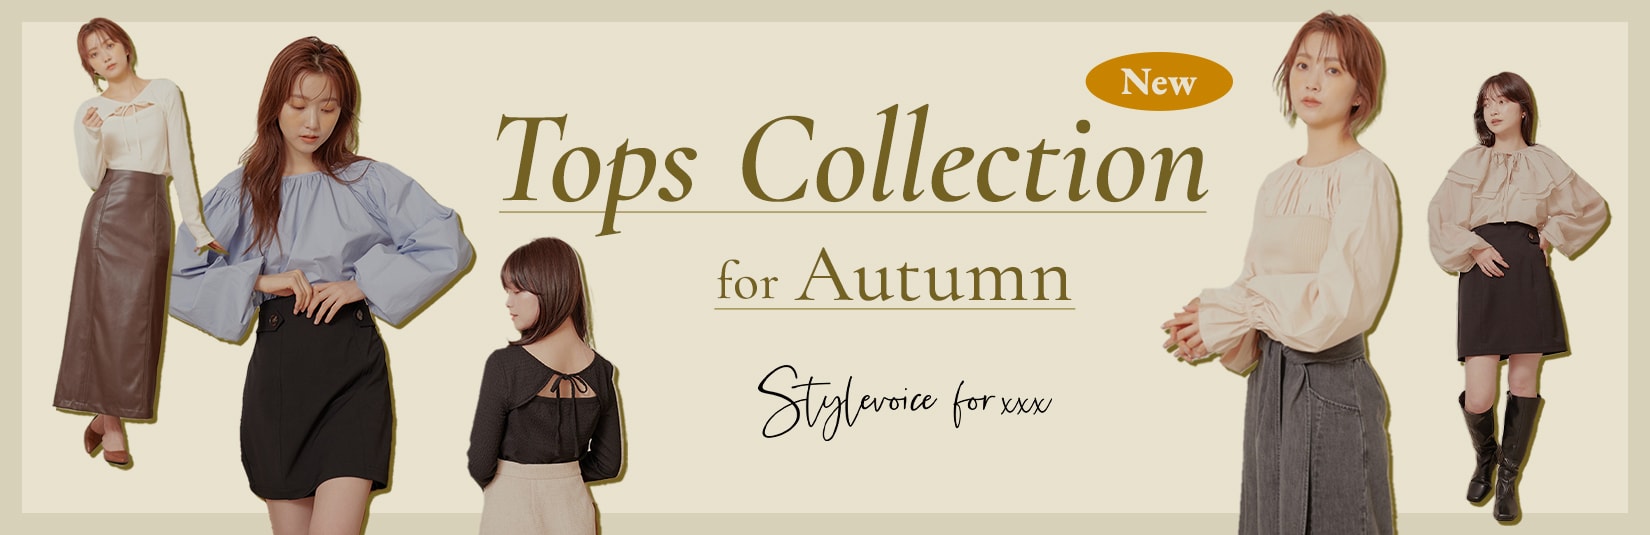 Tops Collection for Autumn